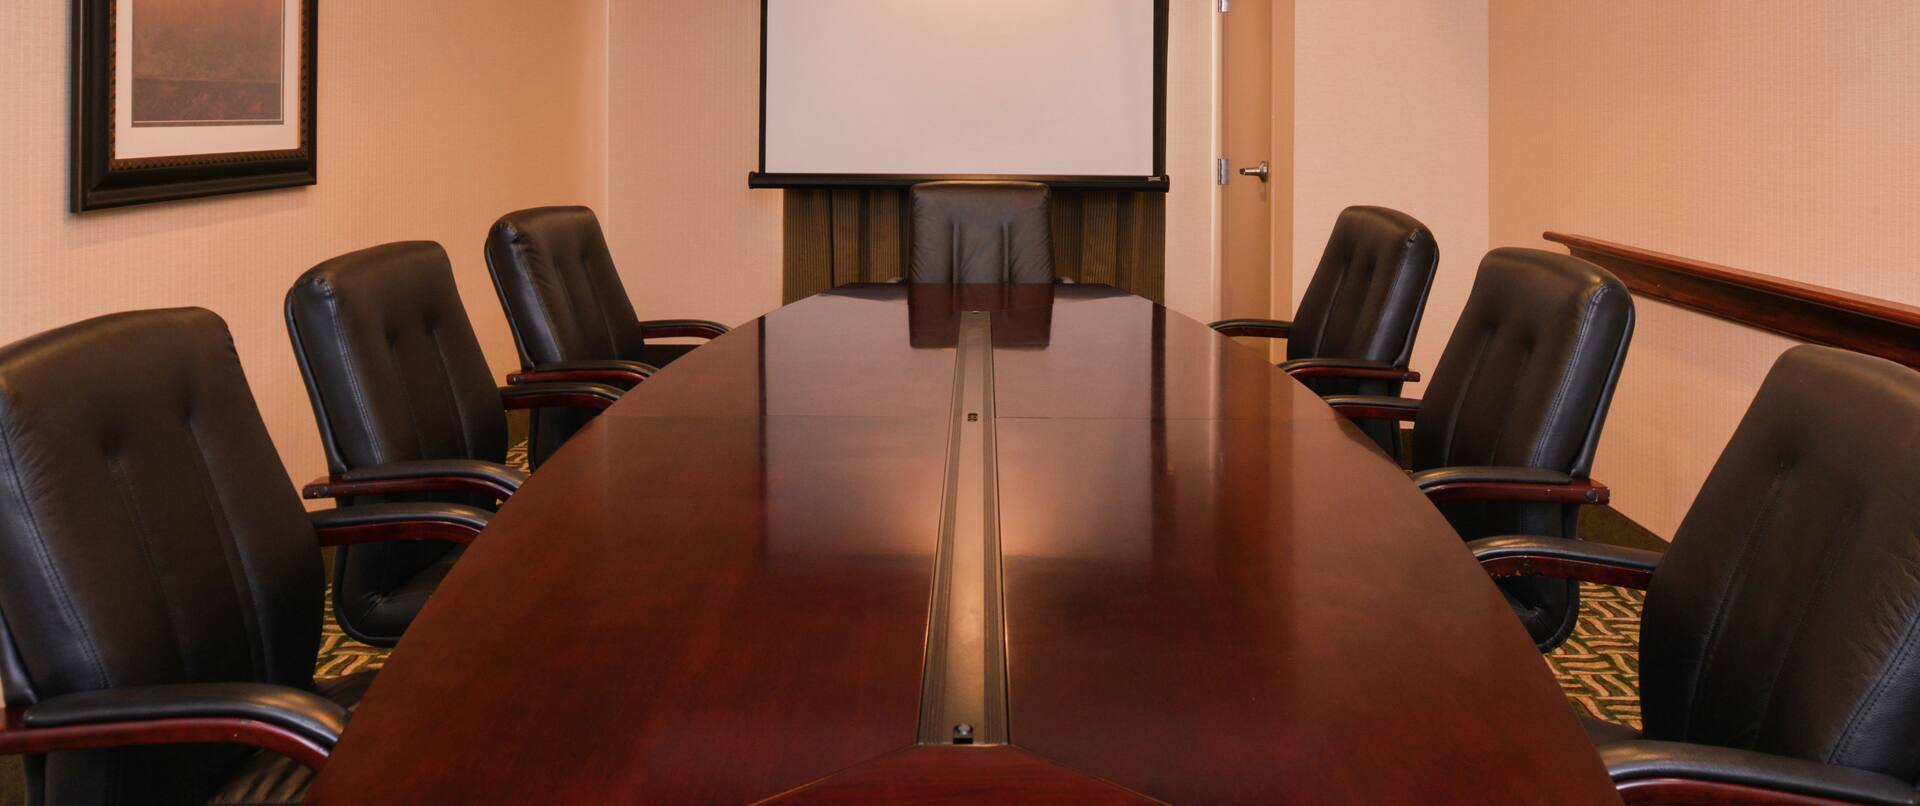 Projector Screen and Seating For 7 at Private Boardroom Table